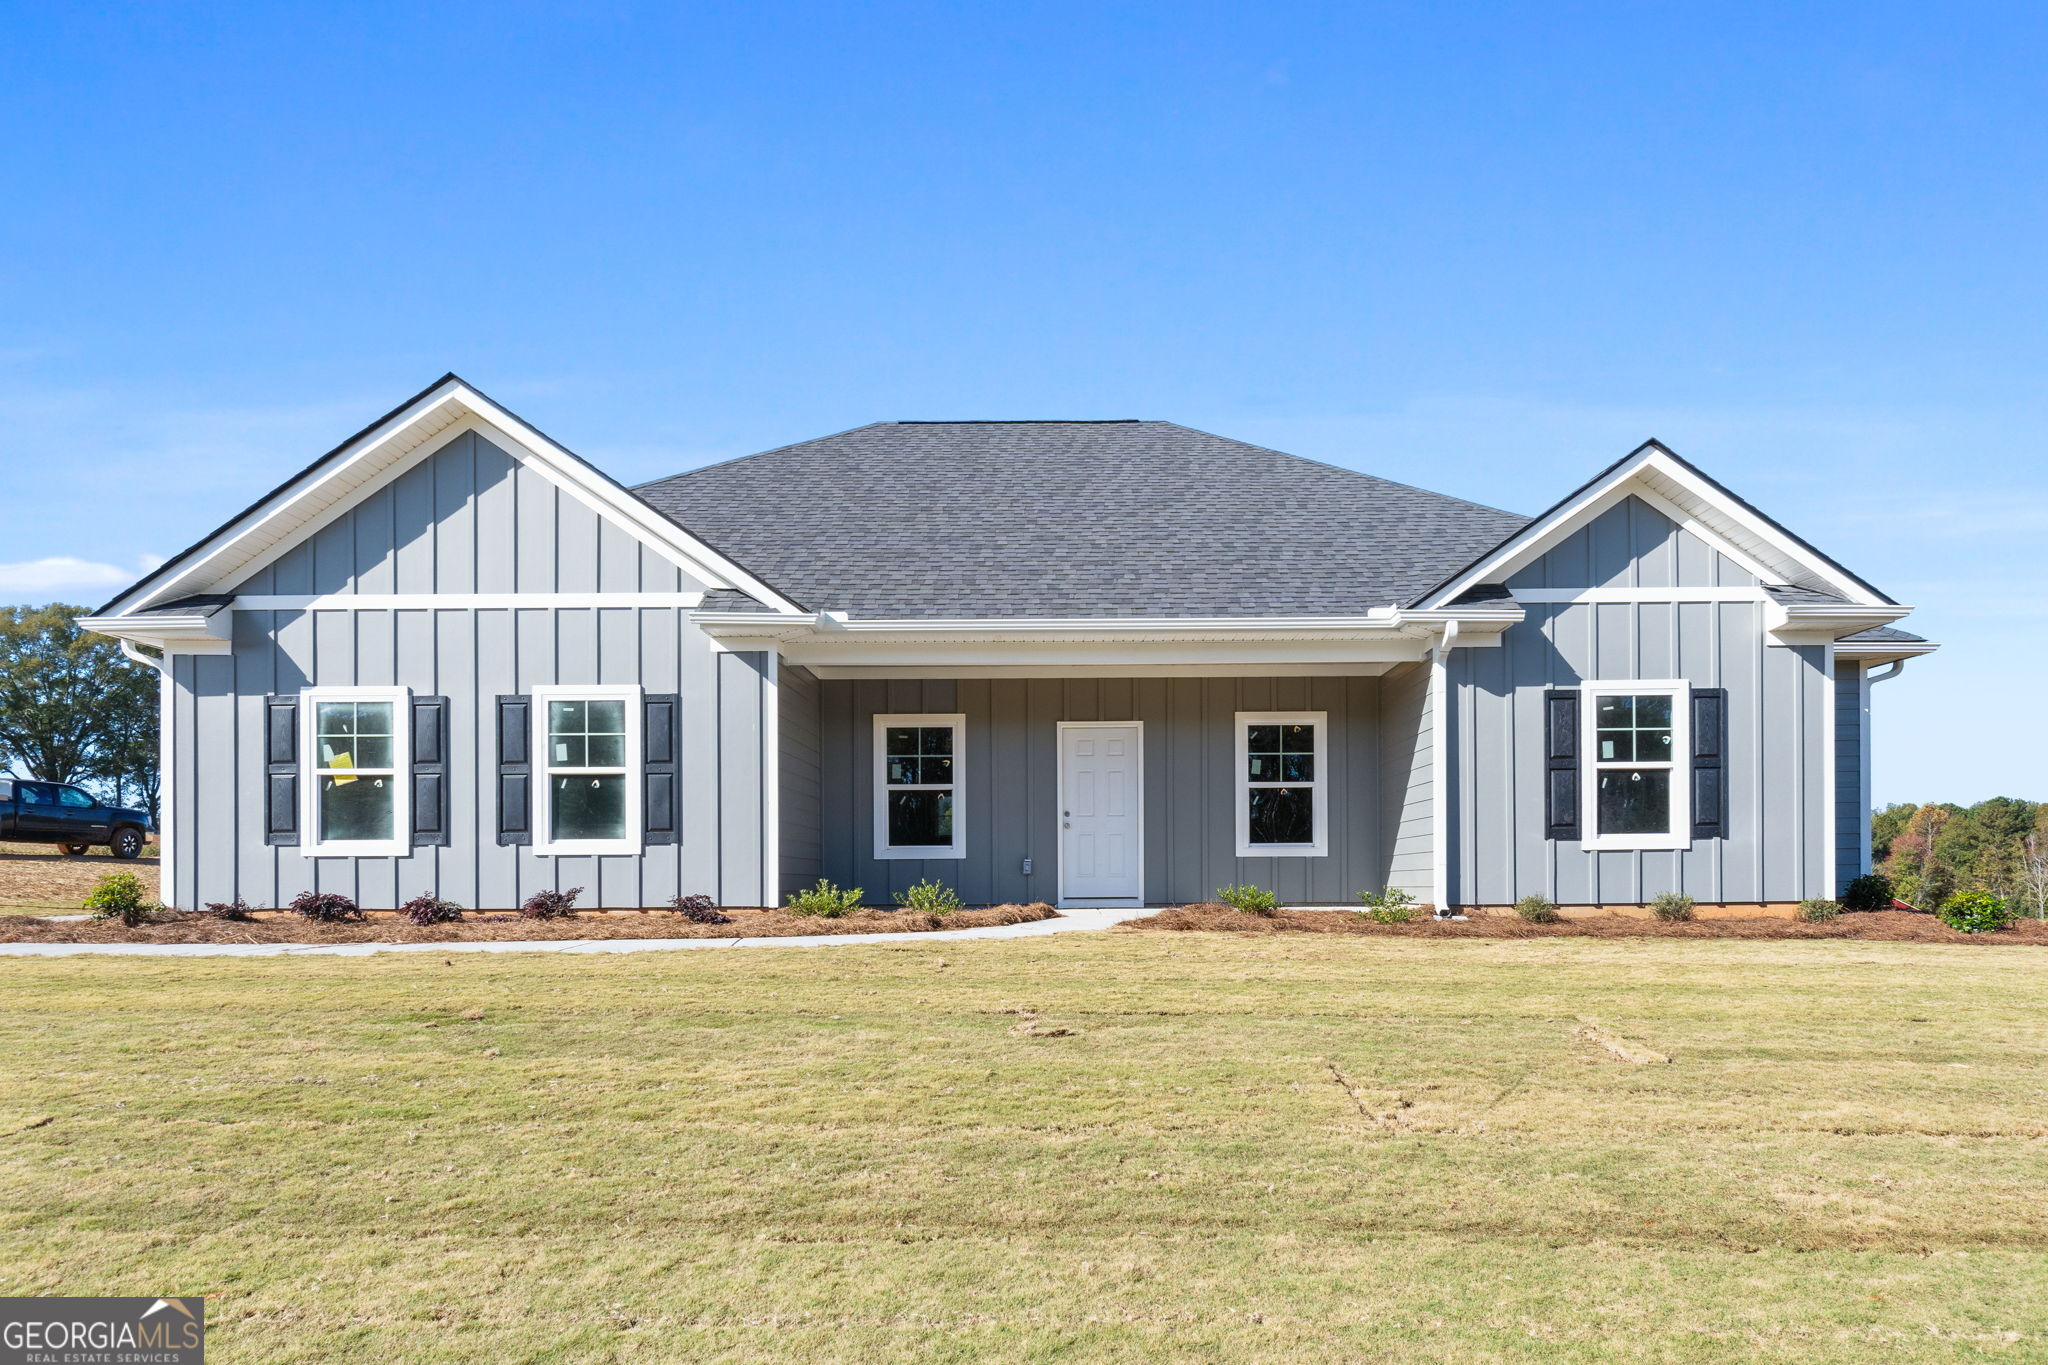 496 Adams Road Meansville, GA 30256 – Pike County New Construction